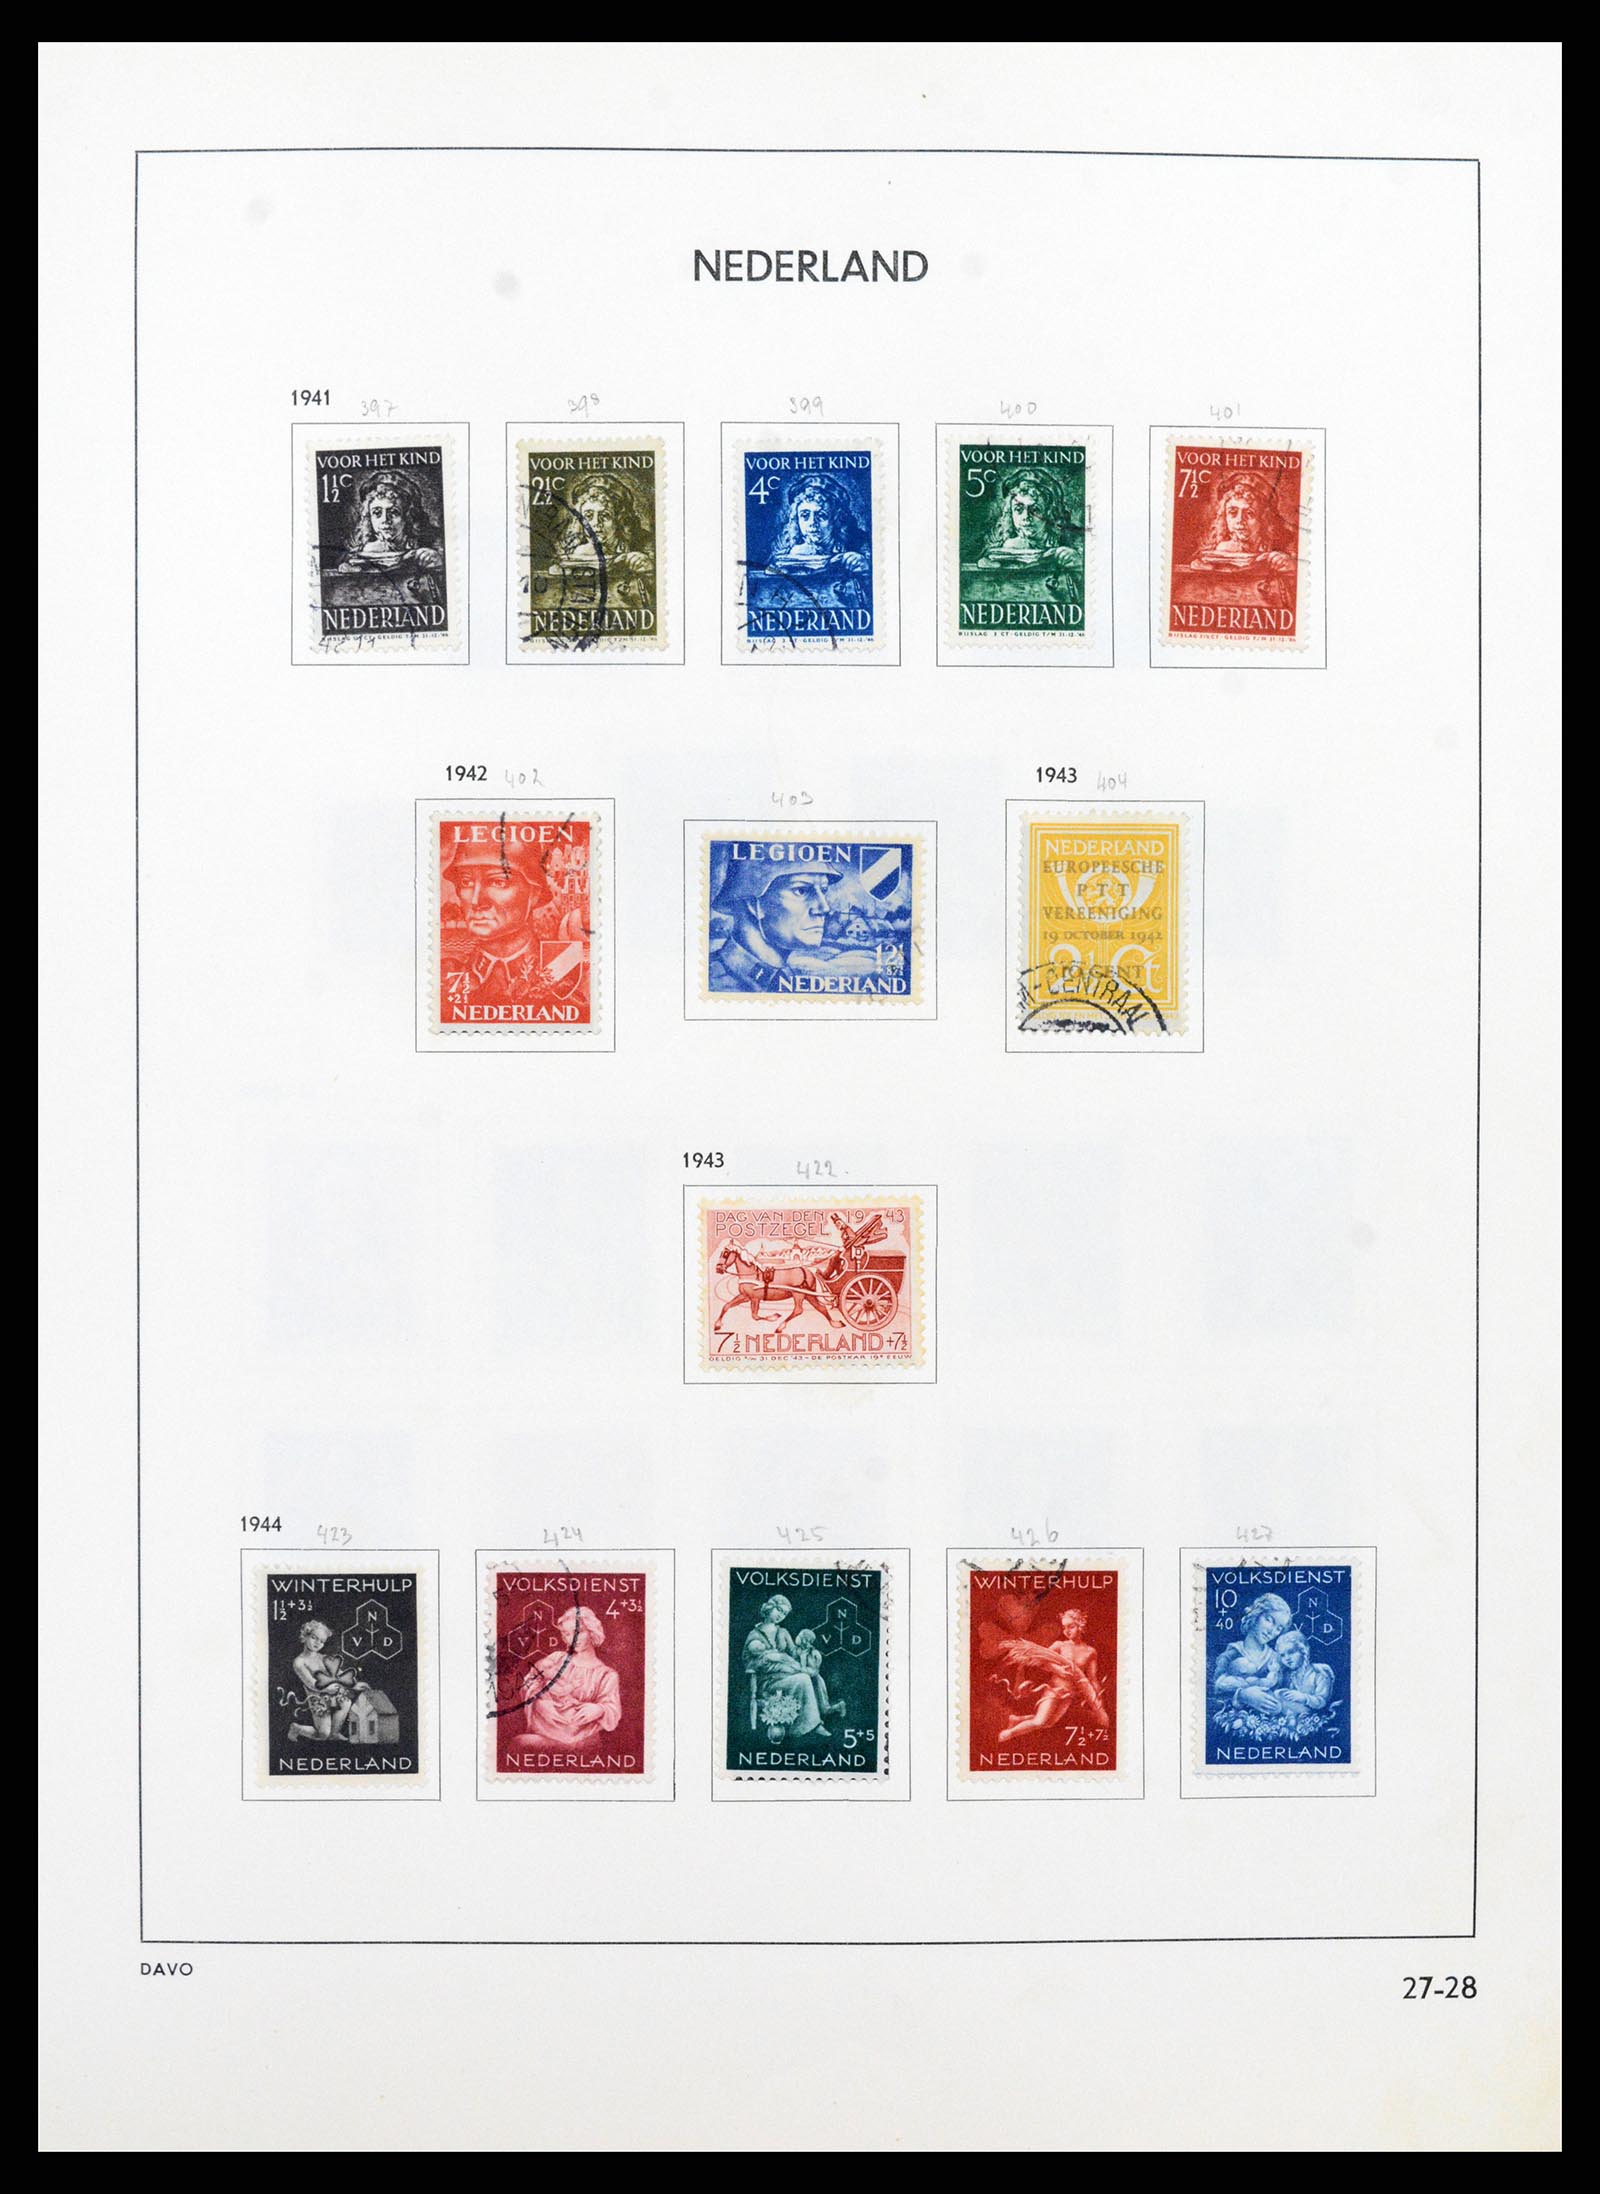 37346 027 - Stamp collection 37346 Netherlands 1852-1996.